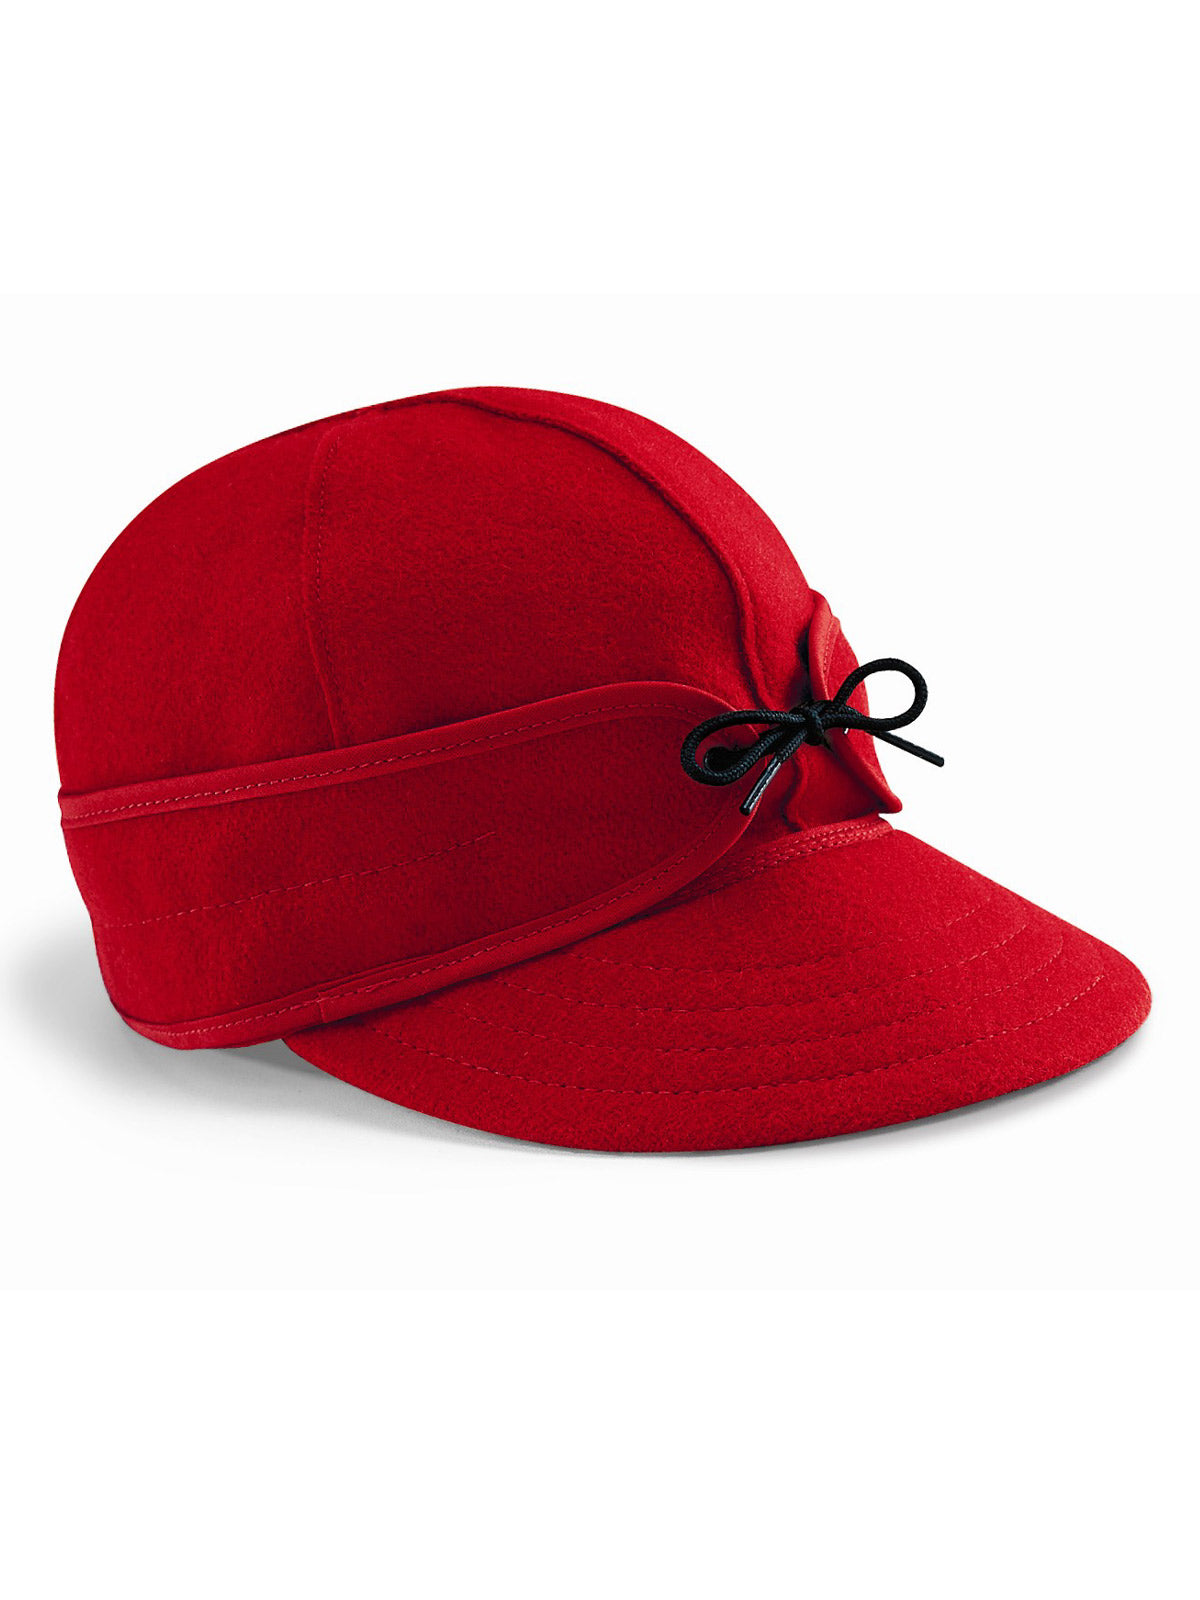 Origional Stormy Kromer Caps With Ear Band in Red - 50010-RED